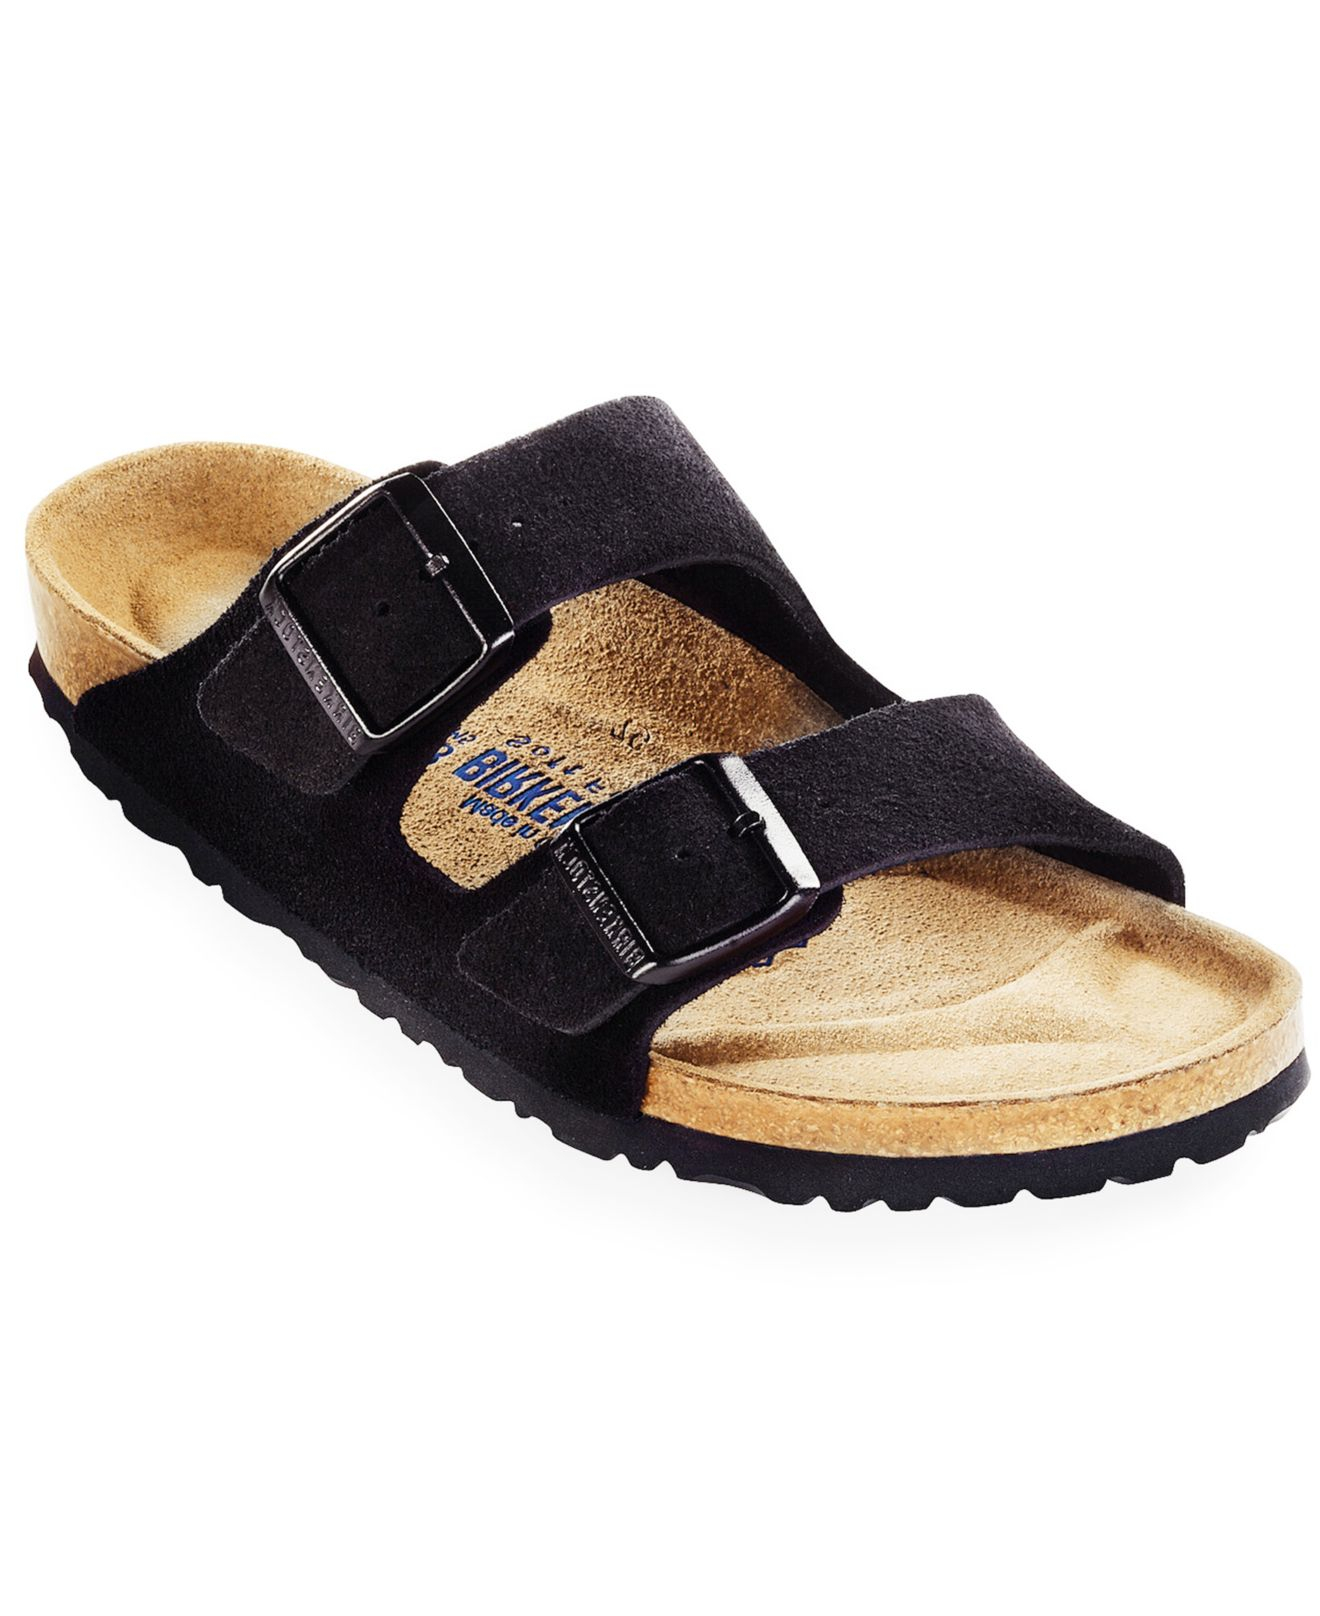 Lyst - Birkenstock Arizona Soft Footbed Two Band Suede Sandals in Black ...